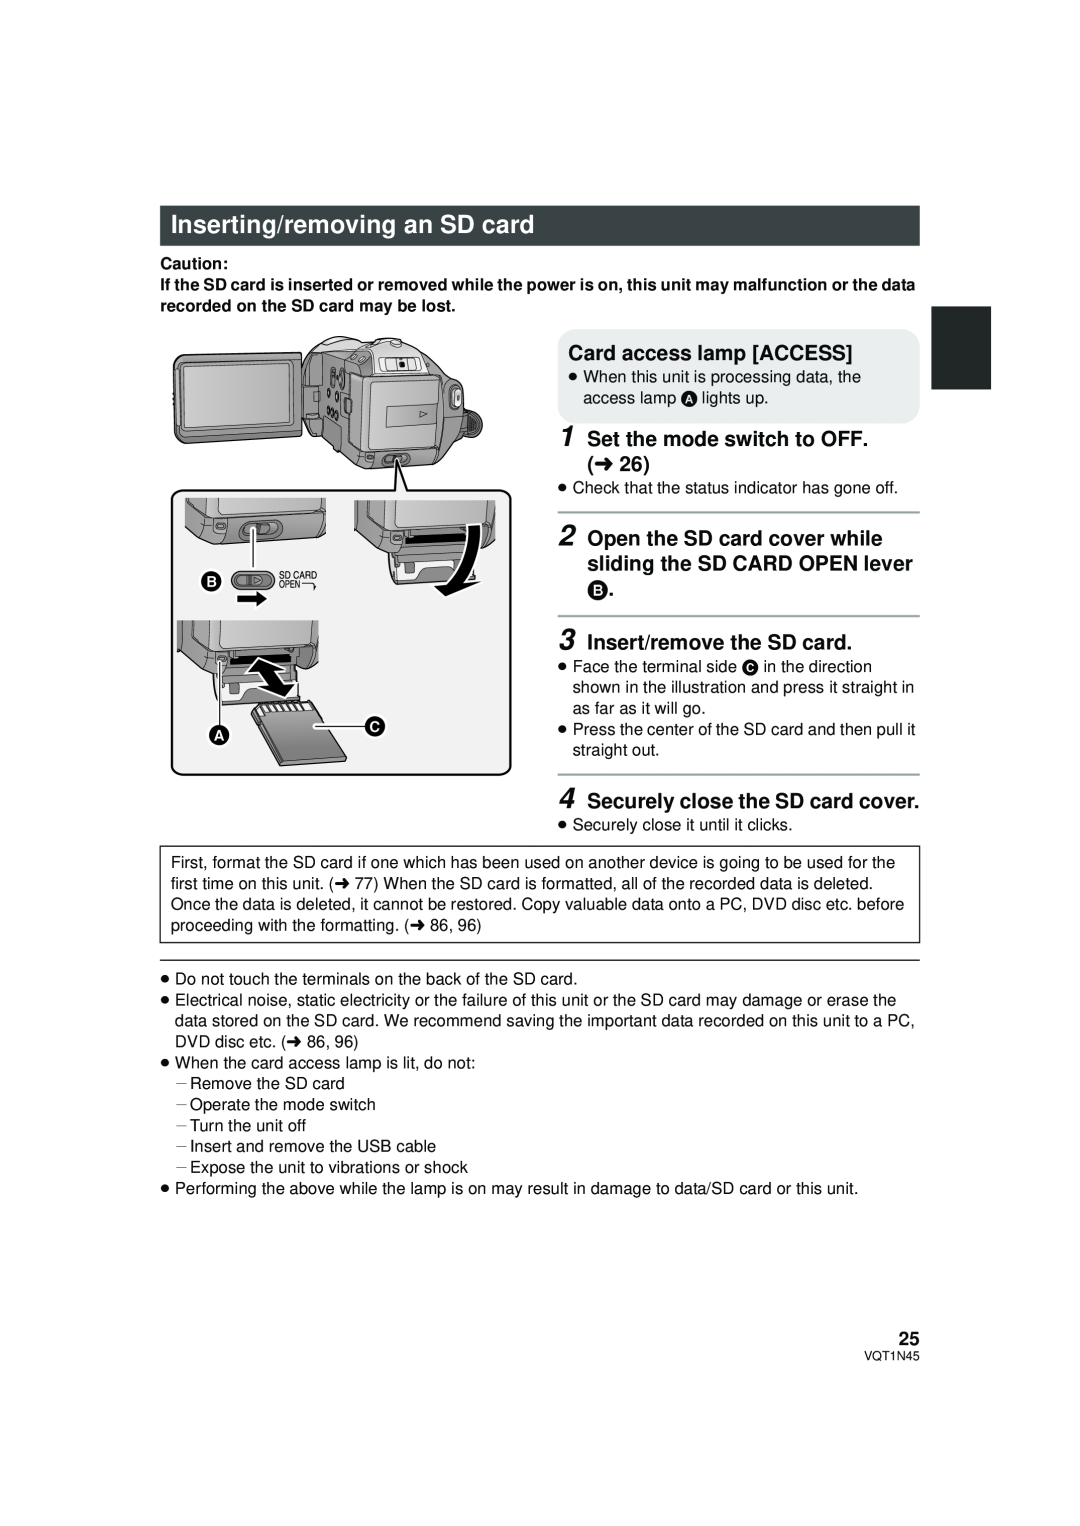 Panasonic HDC-SD9PC manual Inserting/removing an SD card, Set the mode switch to OFF. l, Insert/remove the SD card 